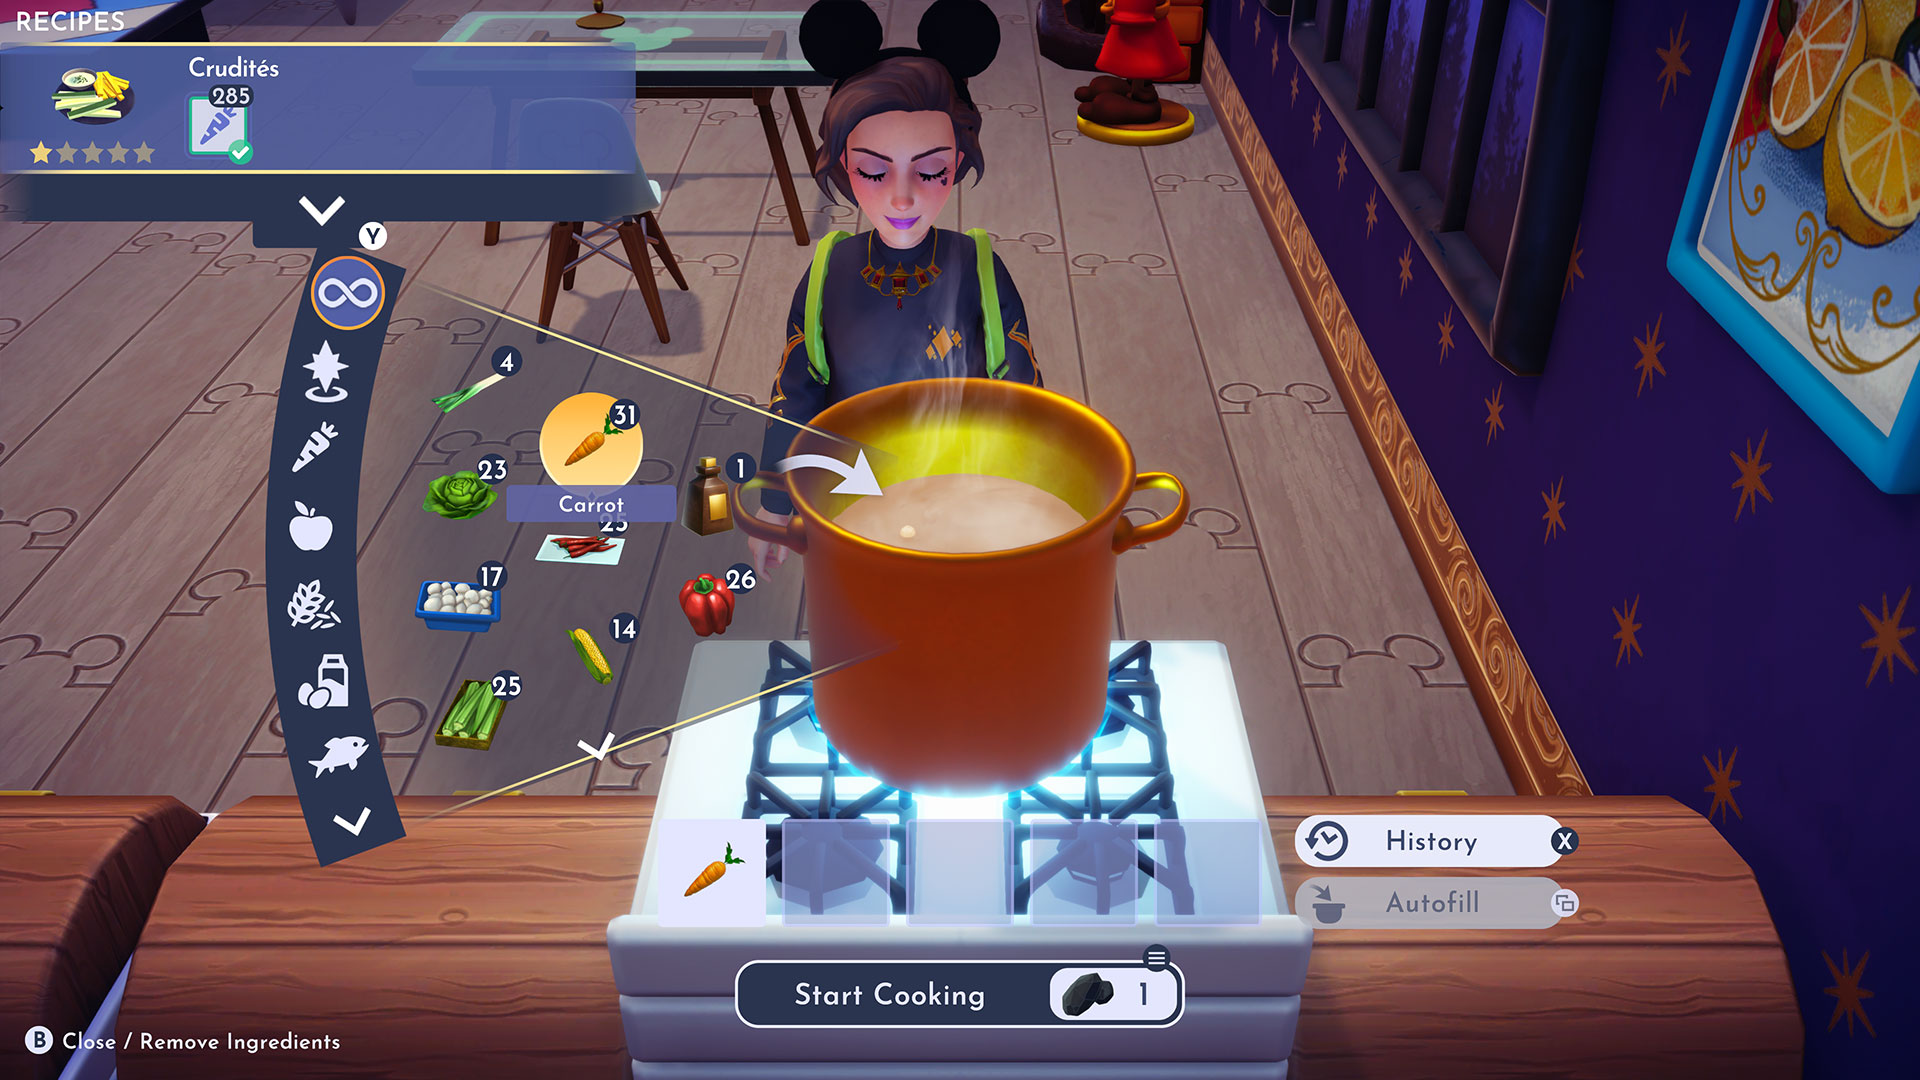 Making crudites at the stove in Disney Dreamlight Valley